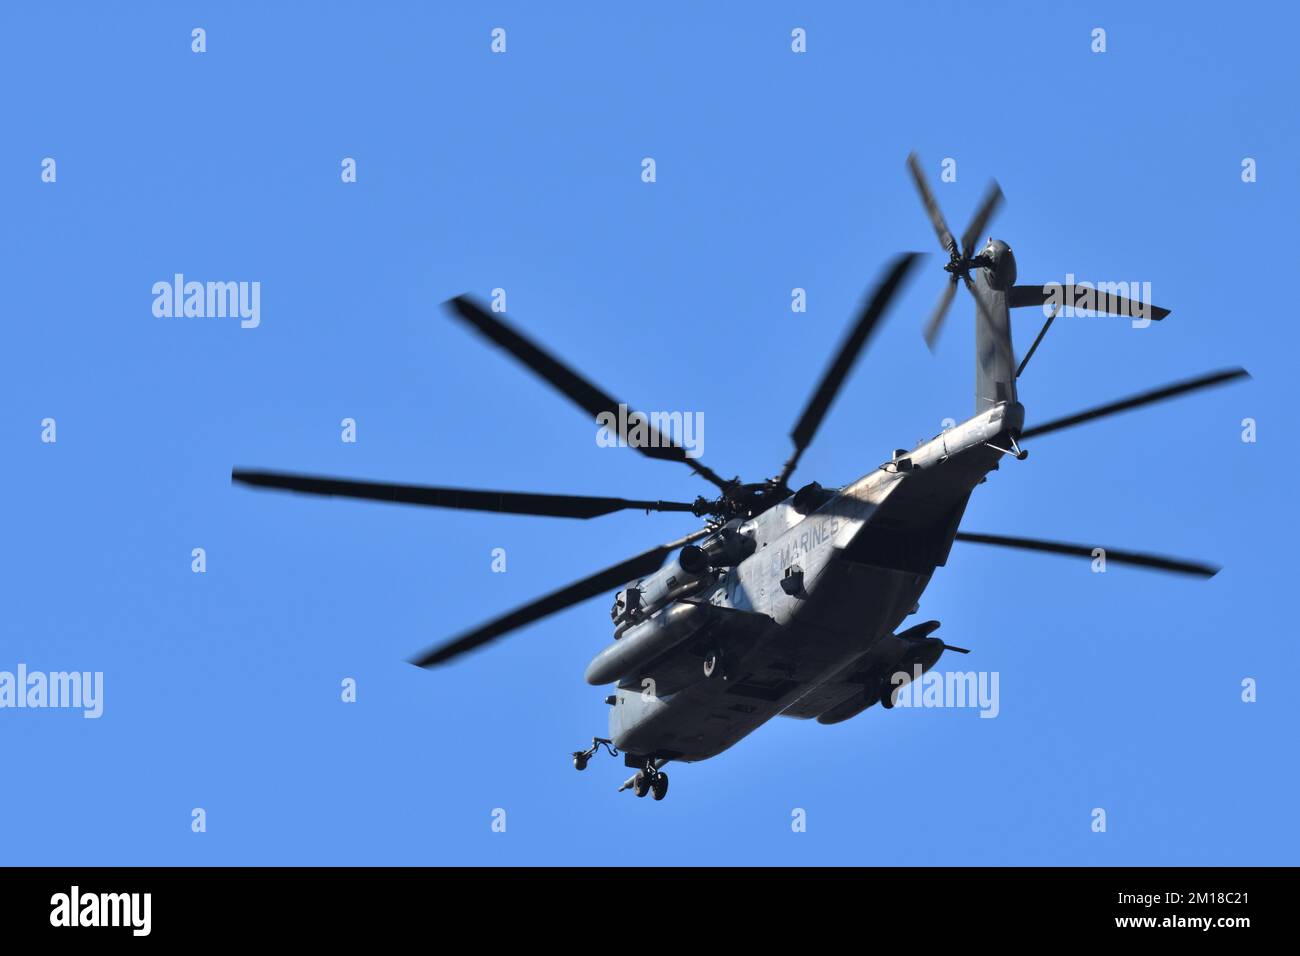 US Marine Corps heavy-lift cargo helicopter in flight. Stock Photo